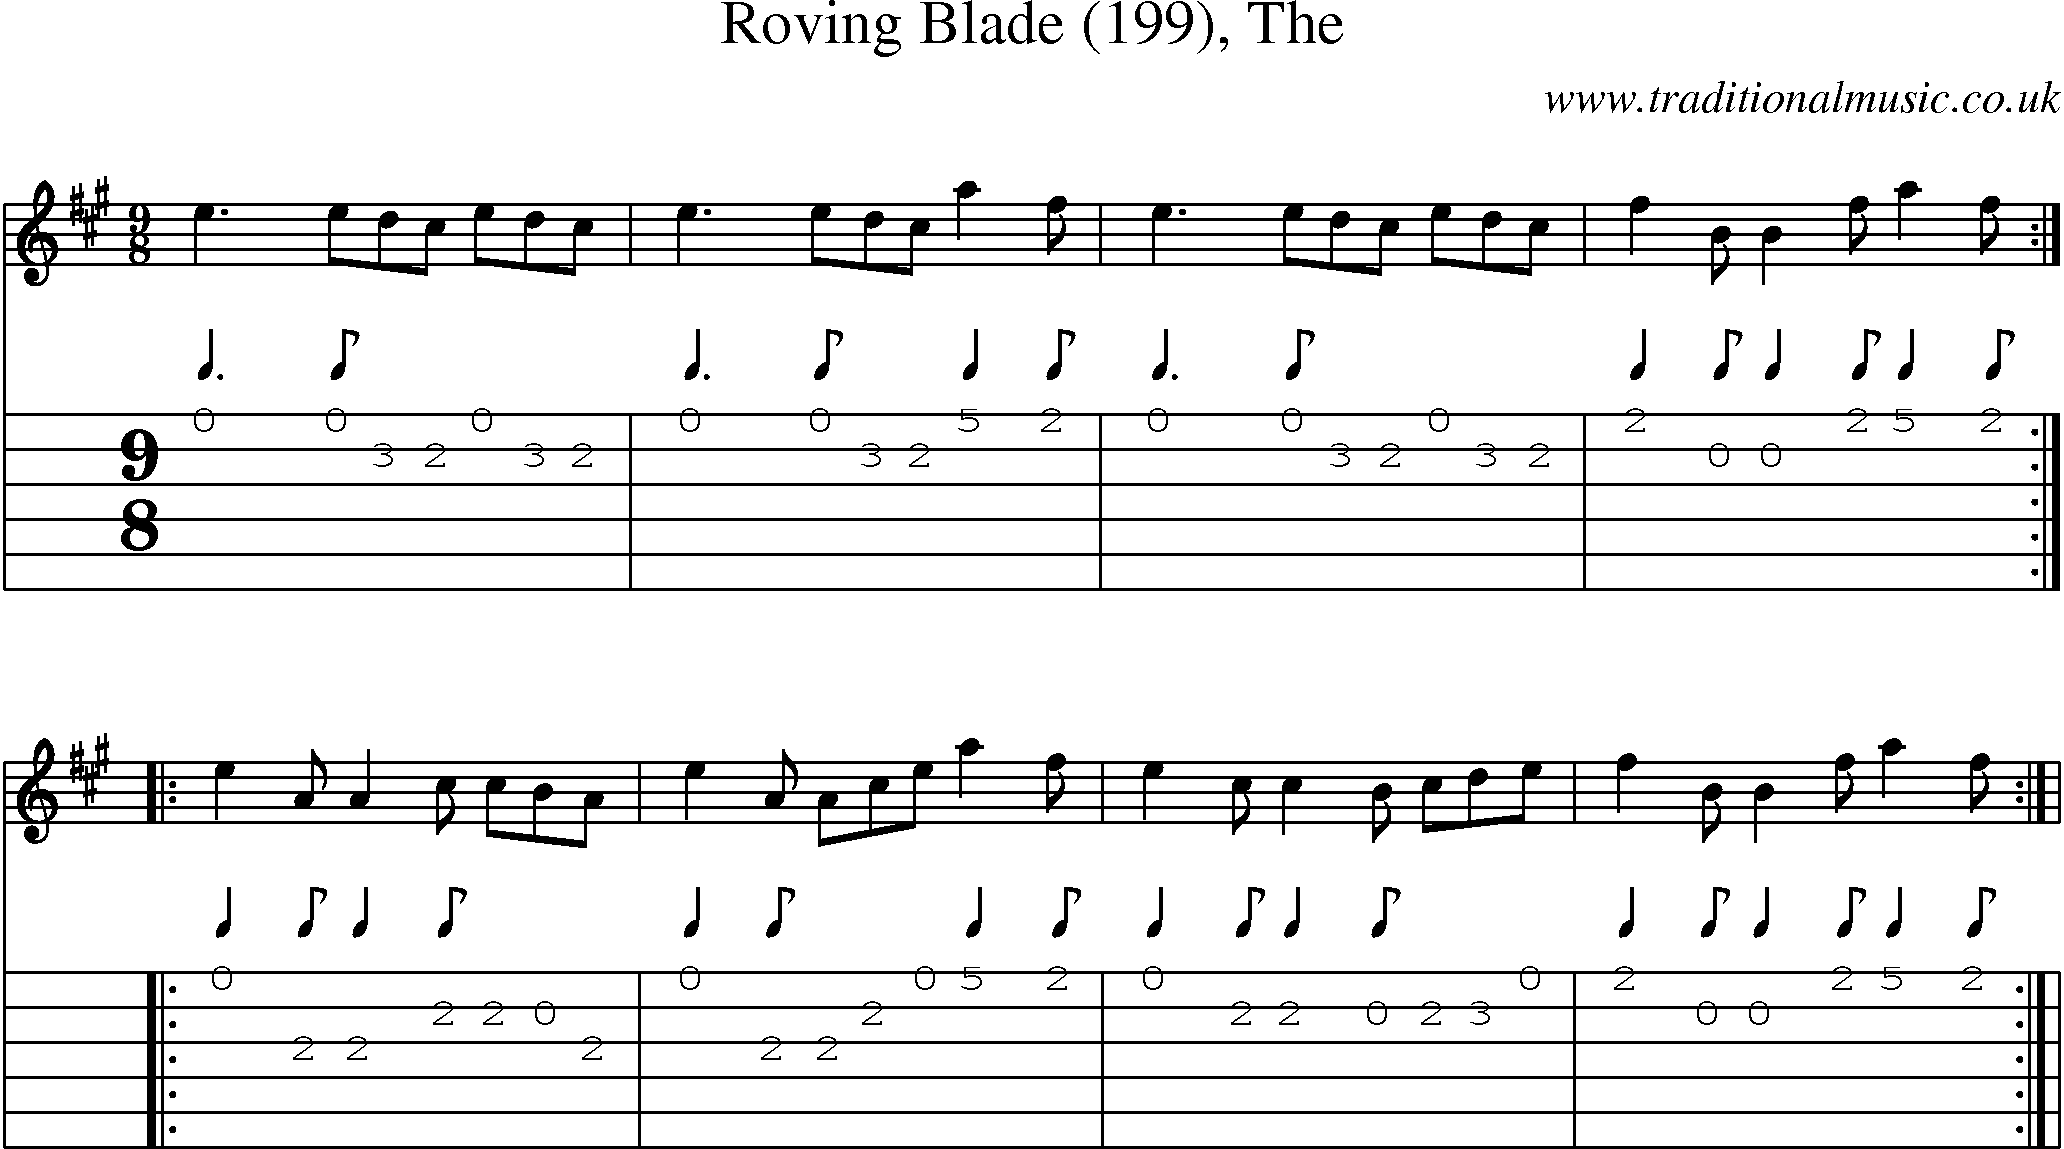 Music Score and Guitar Tabs for Roving Blade (199)